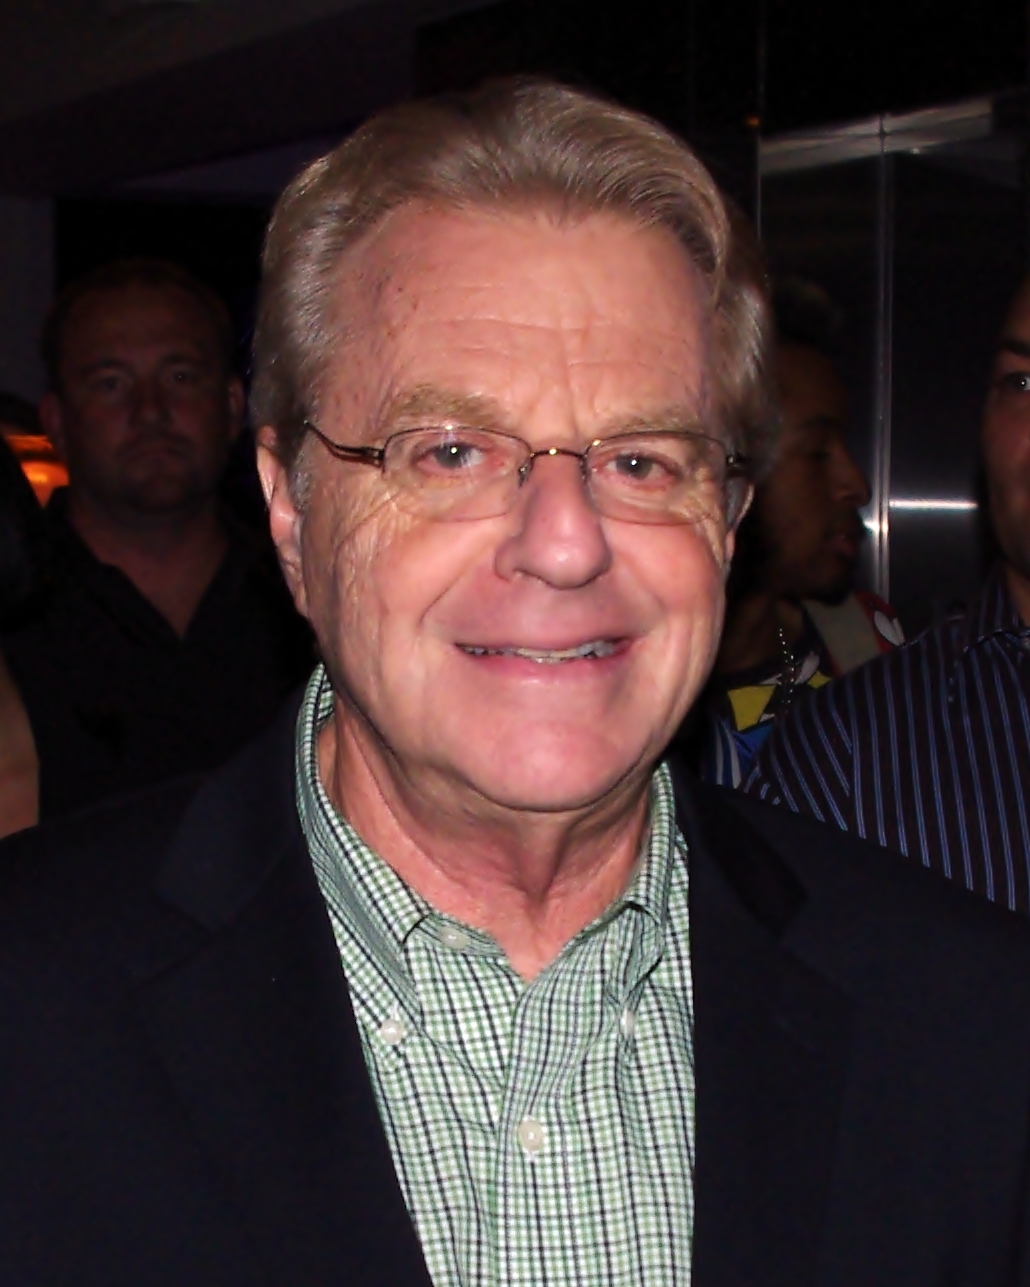 Jerry Springer in 2011. By David Shankbone. CC BY 3.0 Unported.